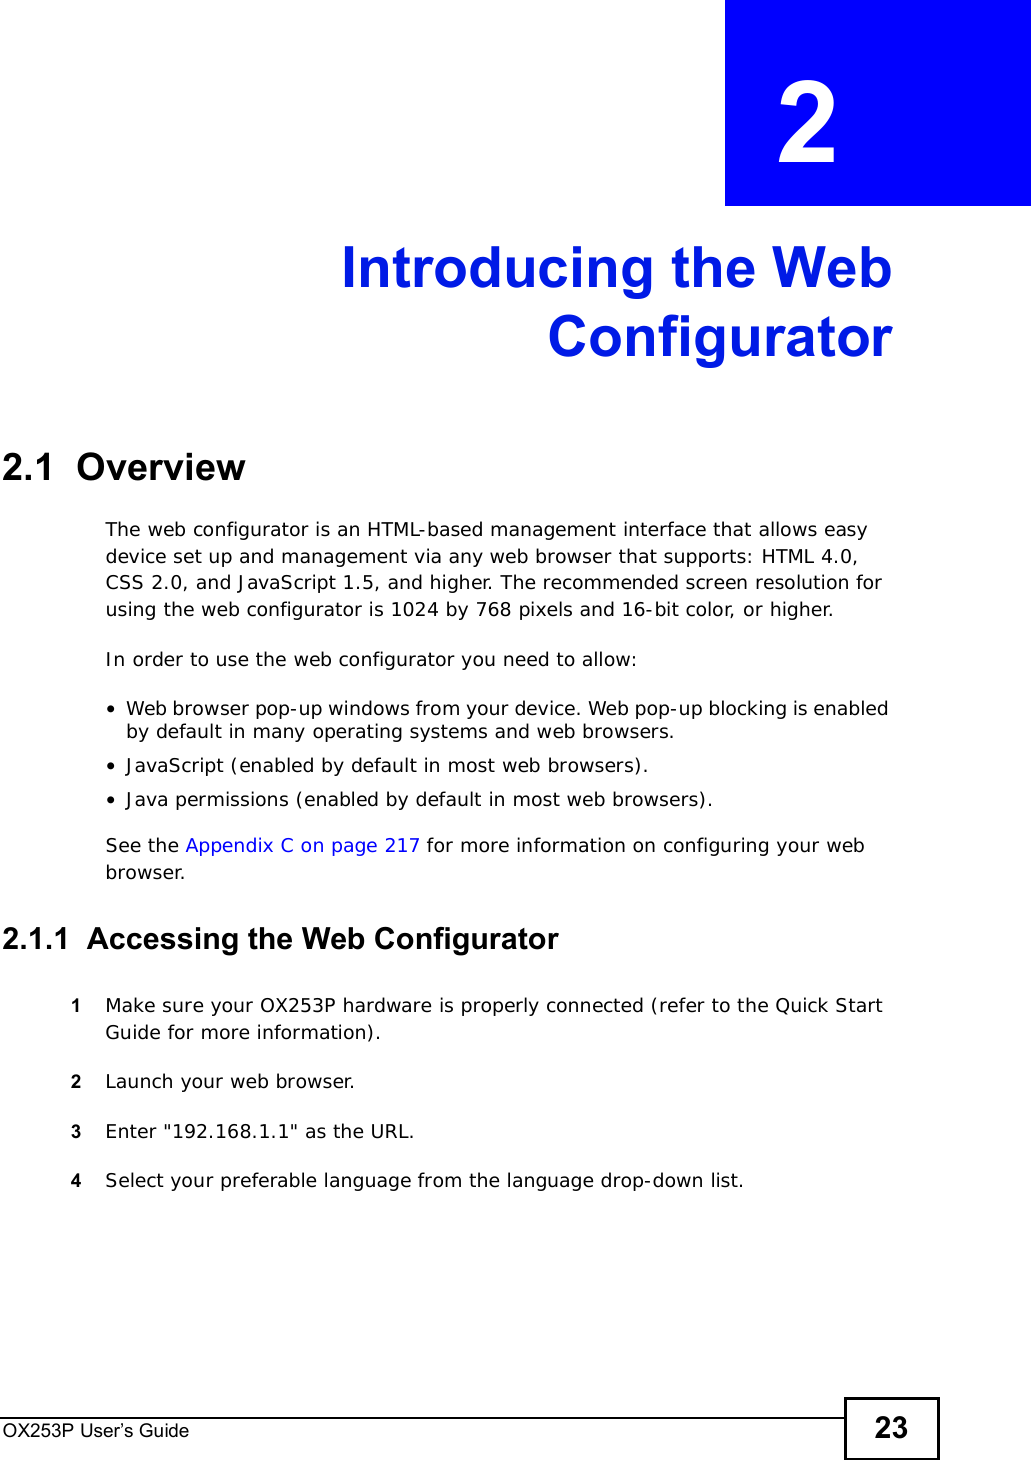 OX253P User’s Guide 23CHAPTER  2 Introducing the WebConfigurator2.1  OverviewThe web configurator is an HTML-based management interface that allows easy device set up and management via any web browser that supports: HTML 4.0, CSS 2.0, and JavaScript 1.5, and higher. The recommended screen resolution for using the web configurator is 1024 by 768 pixels and 16-bit color, or higher.In order to use the web configurator you need to allow:•Web browser pop-up windows from your device. Web pop-up blocking is enabled by default in many operating systems and web browsers.•JavaScript (enabled by default in most web browsers).•Java permissions (enabled by default in most web browsers).See the Appendix C on page 217 for more information on configuring your web browser.2.1.1  Accessing the Web Configurator1Make sure your OX253P hardware is properly connected (refer to the Quick Start Guide for more information).2Launch your web browser.3Enter &quot;192.168.1.1&quot; as the URL.4Select your preferable language from the language drop-down list.